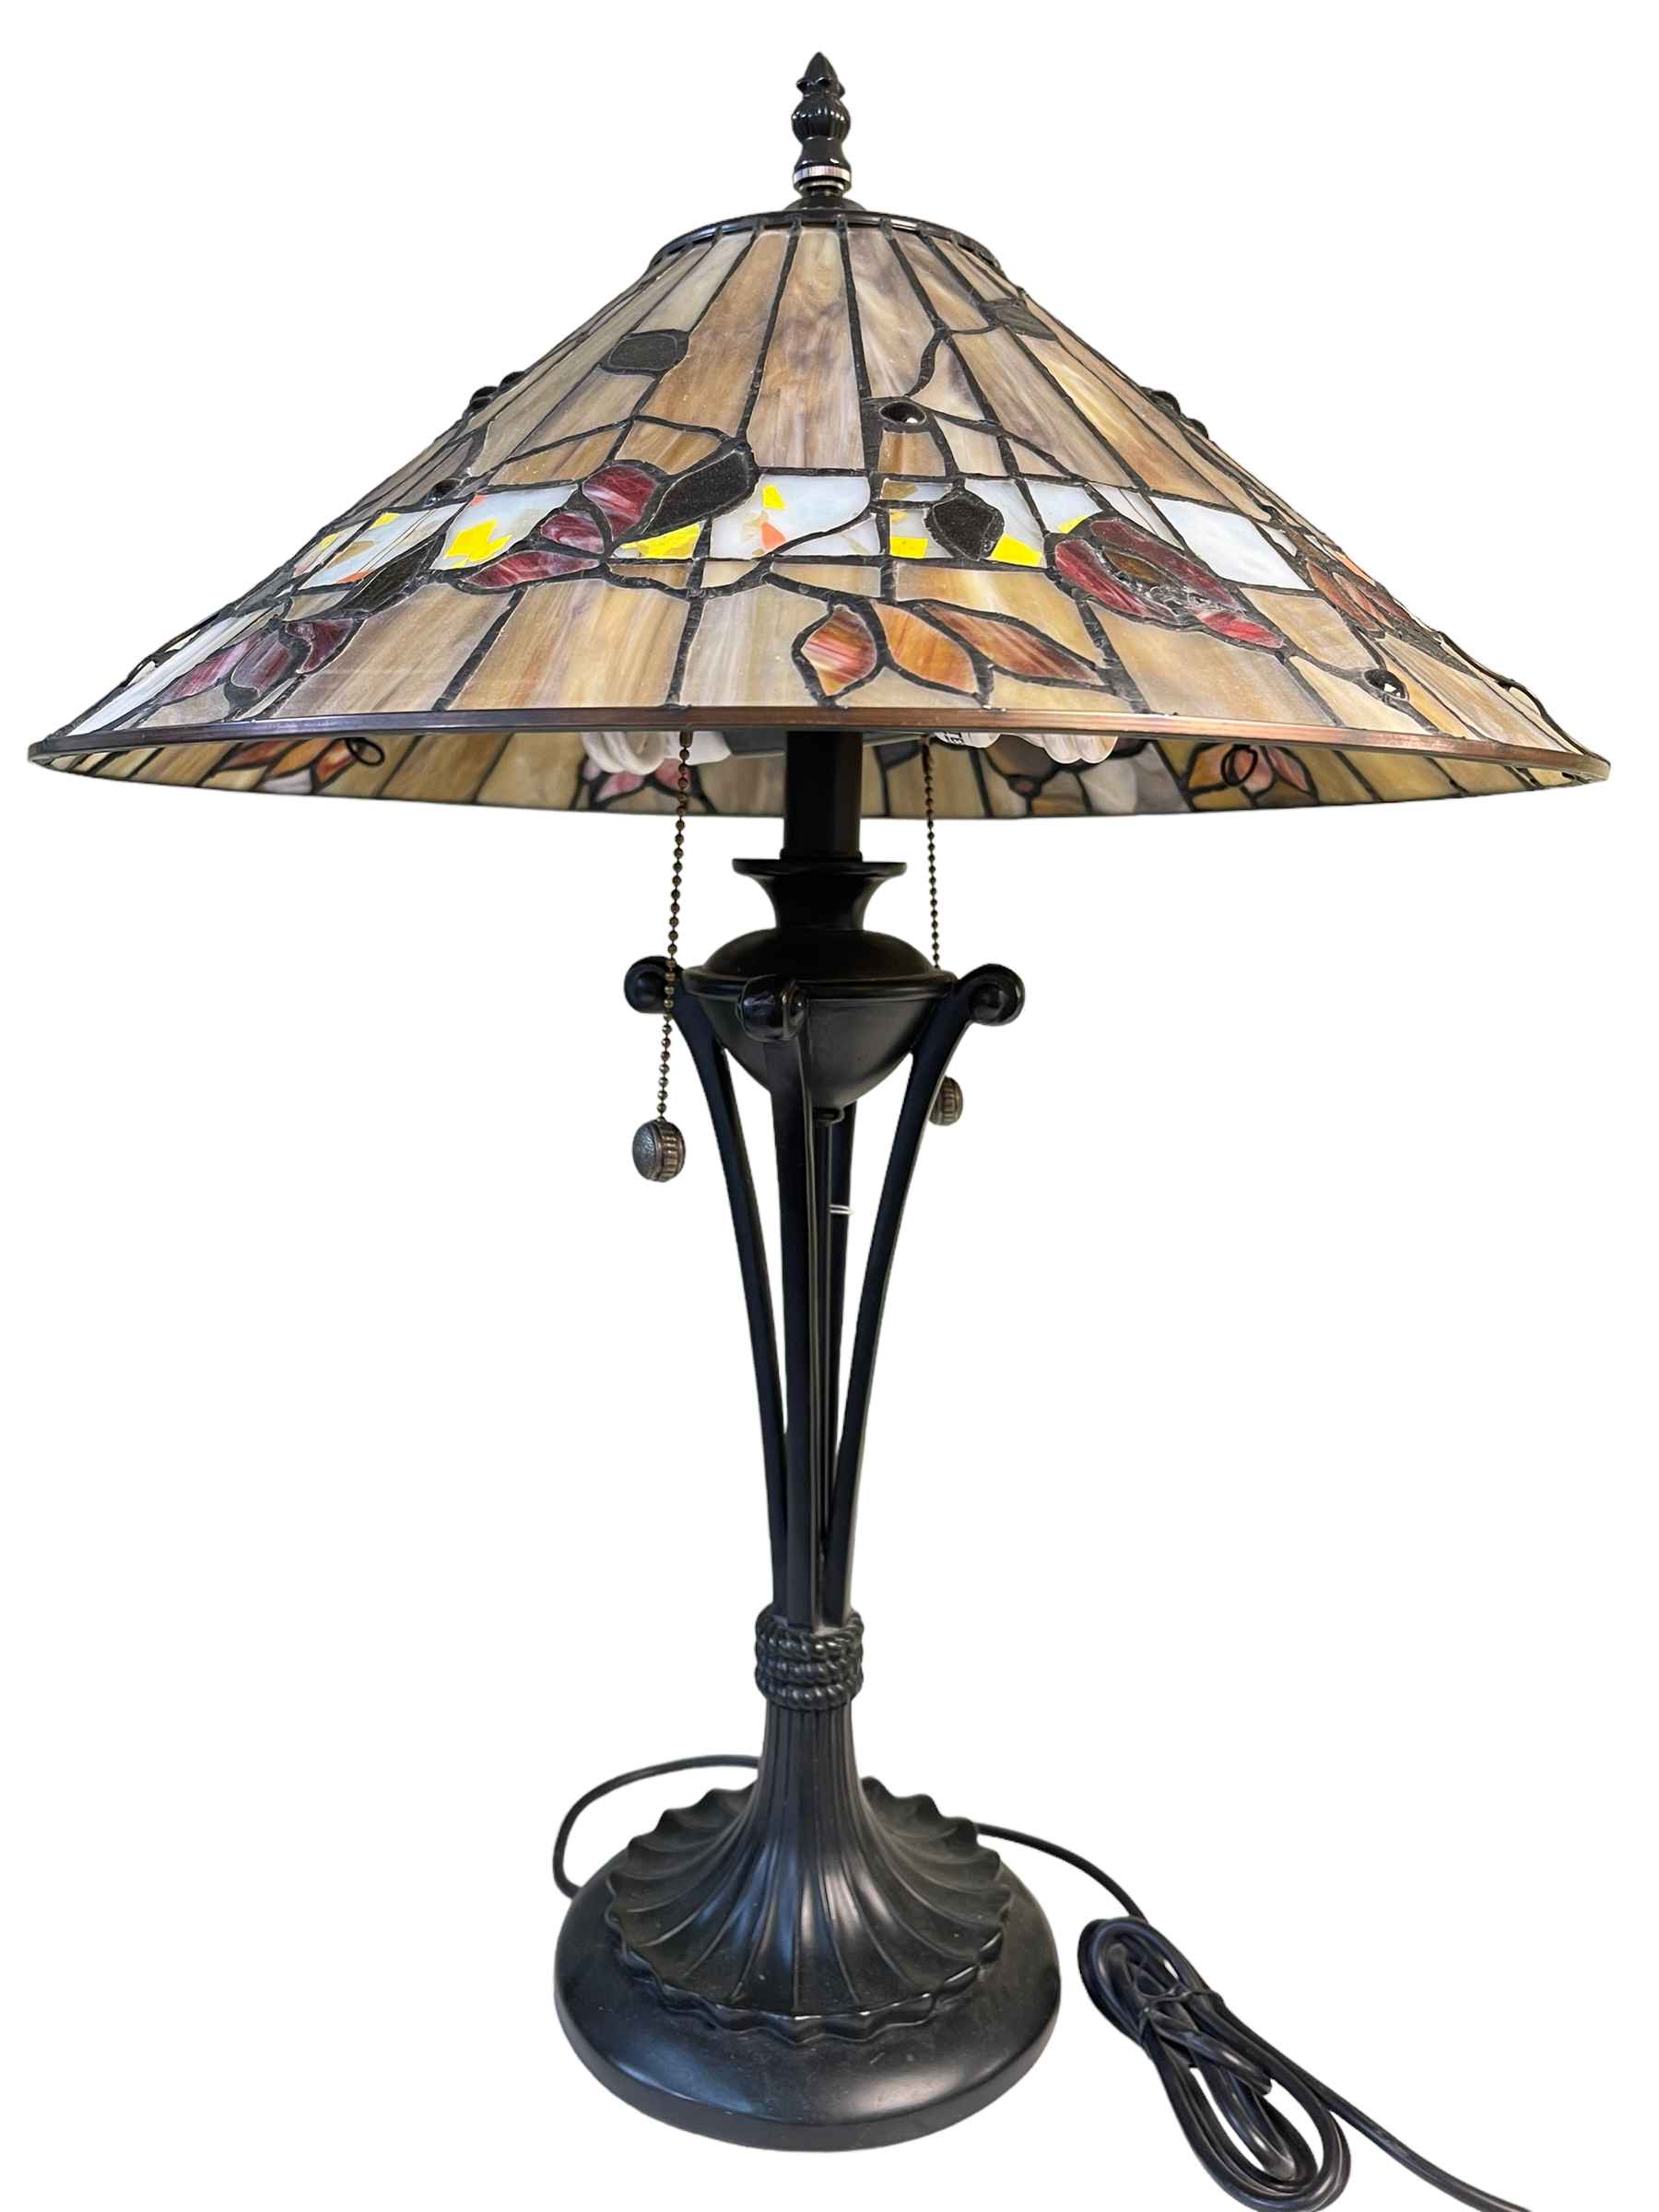 Large Tiffany style table lamp.